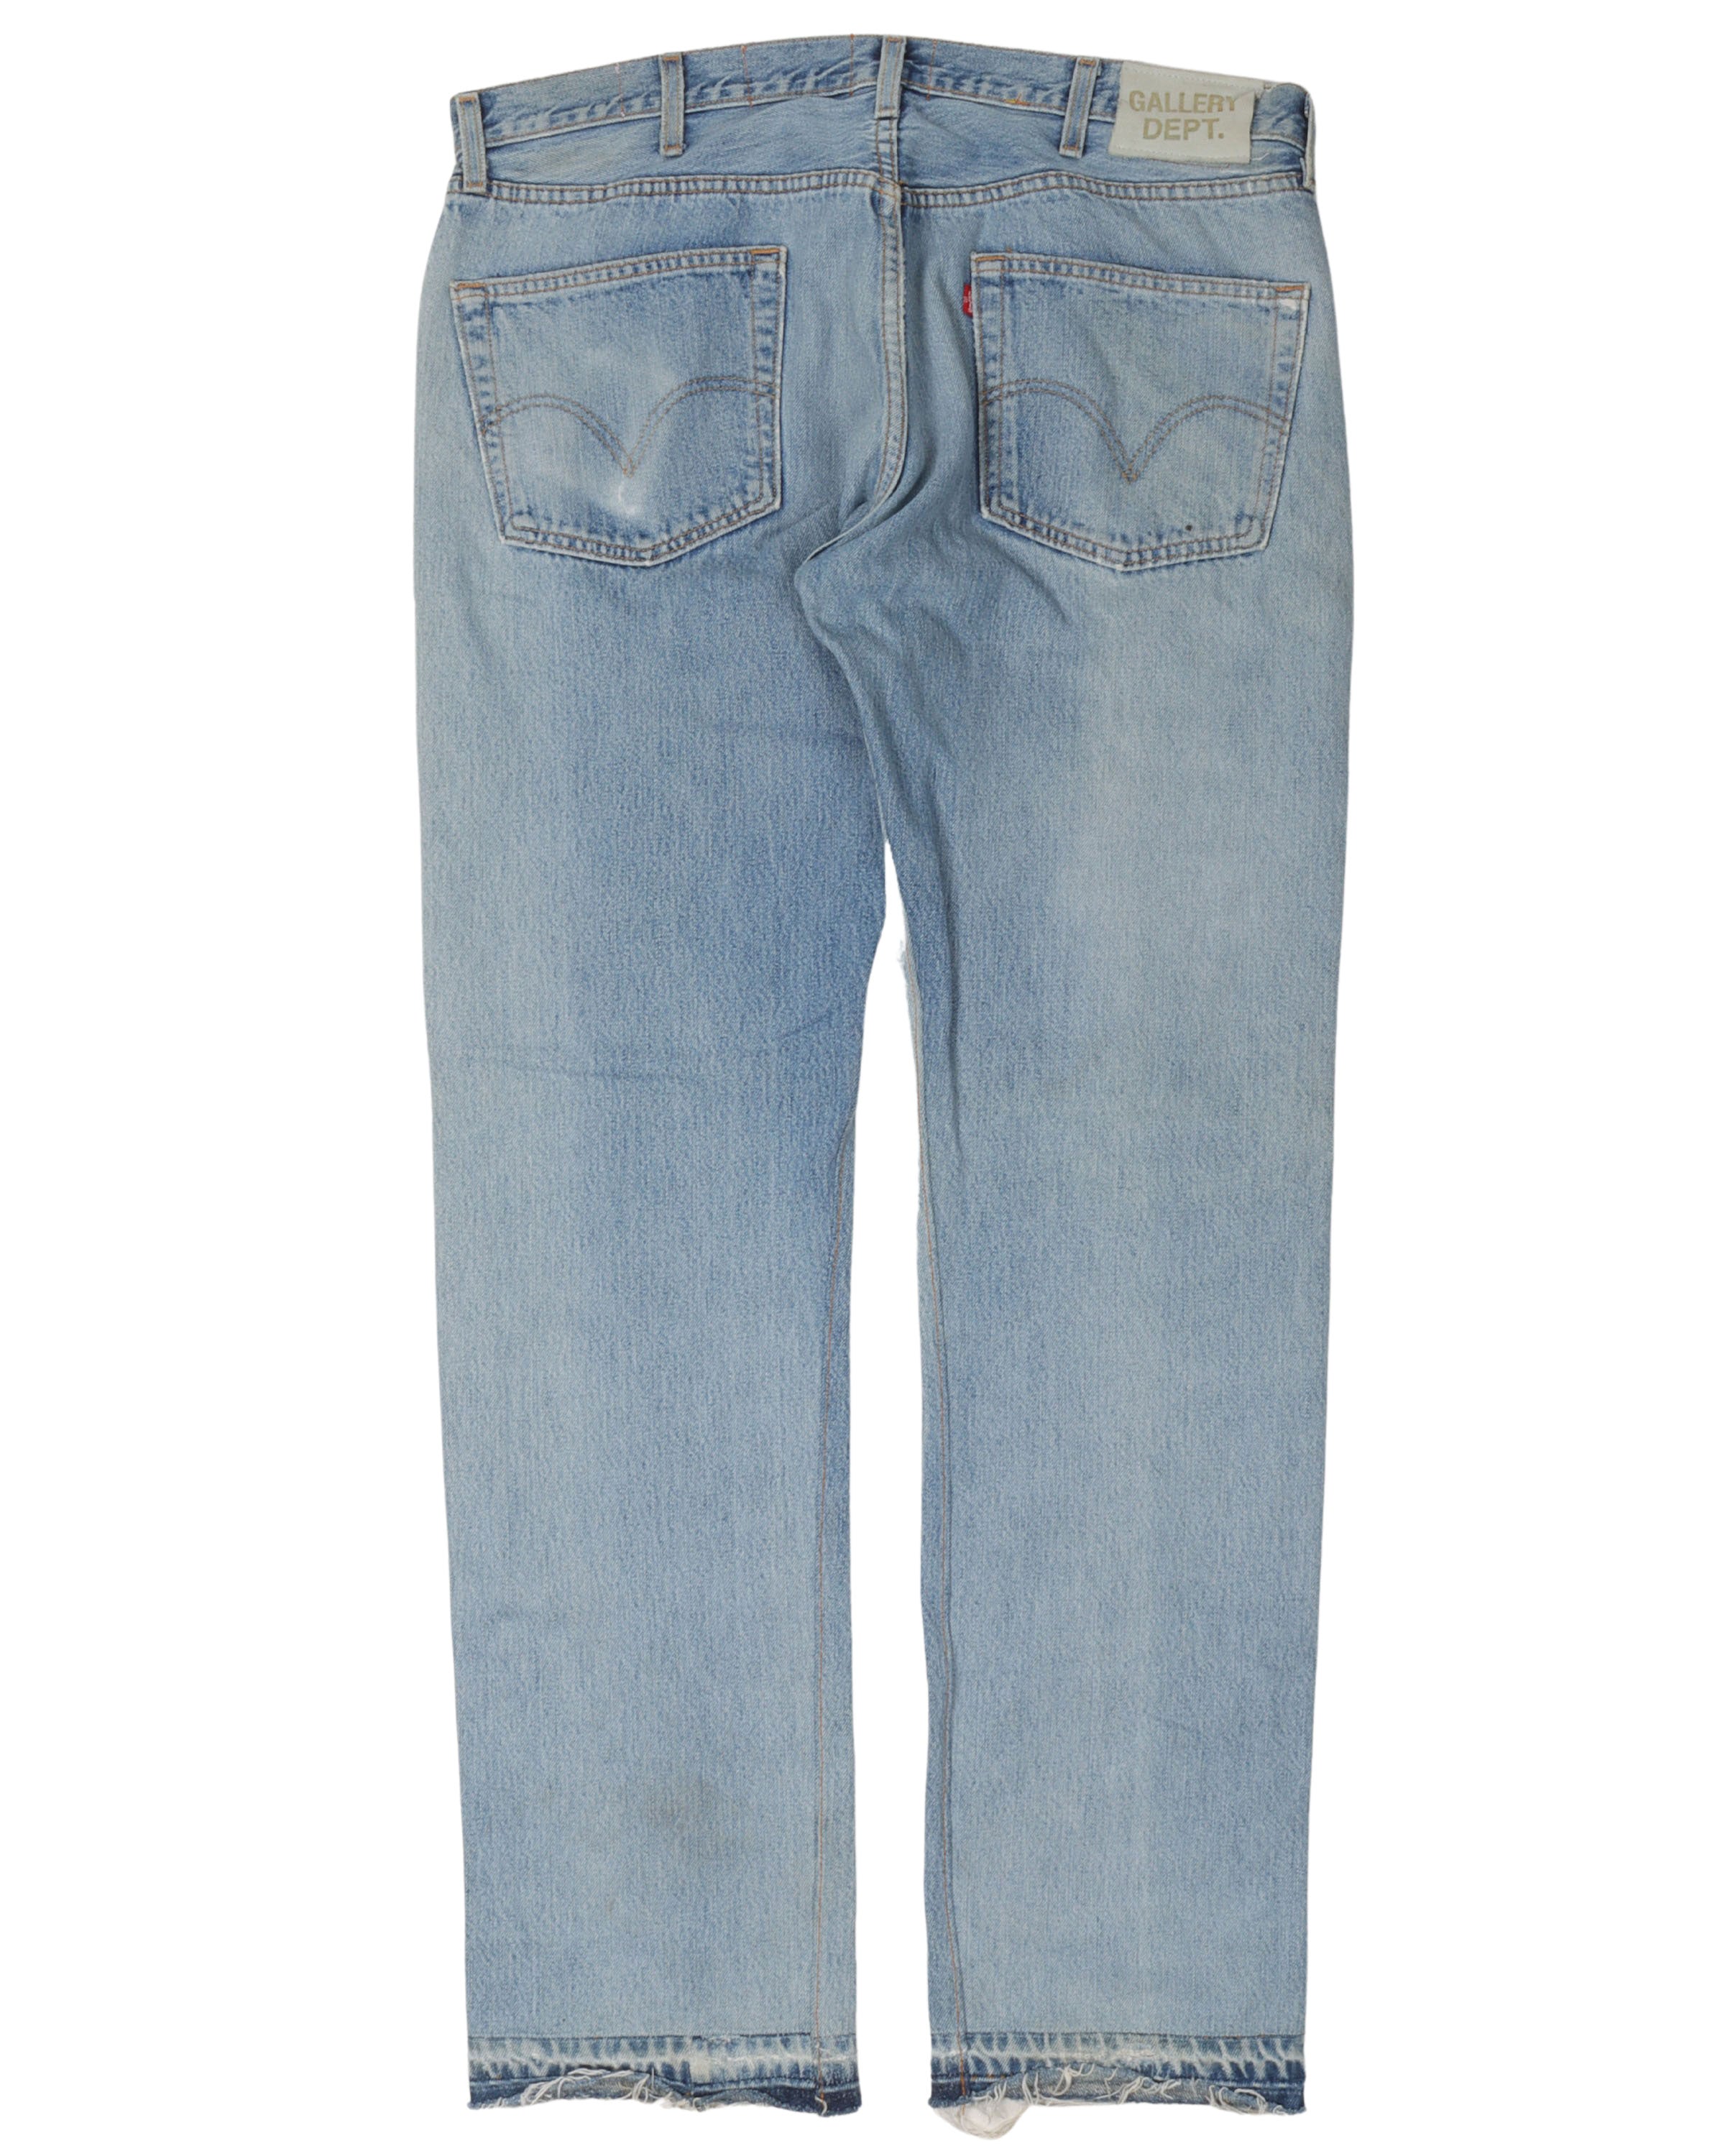 5001 Distressed Jeans